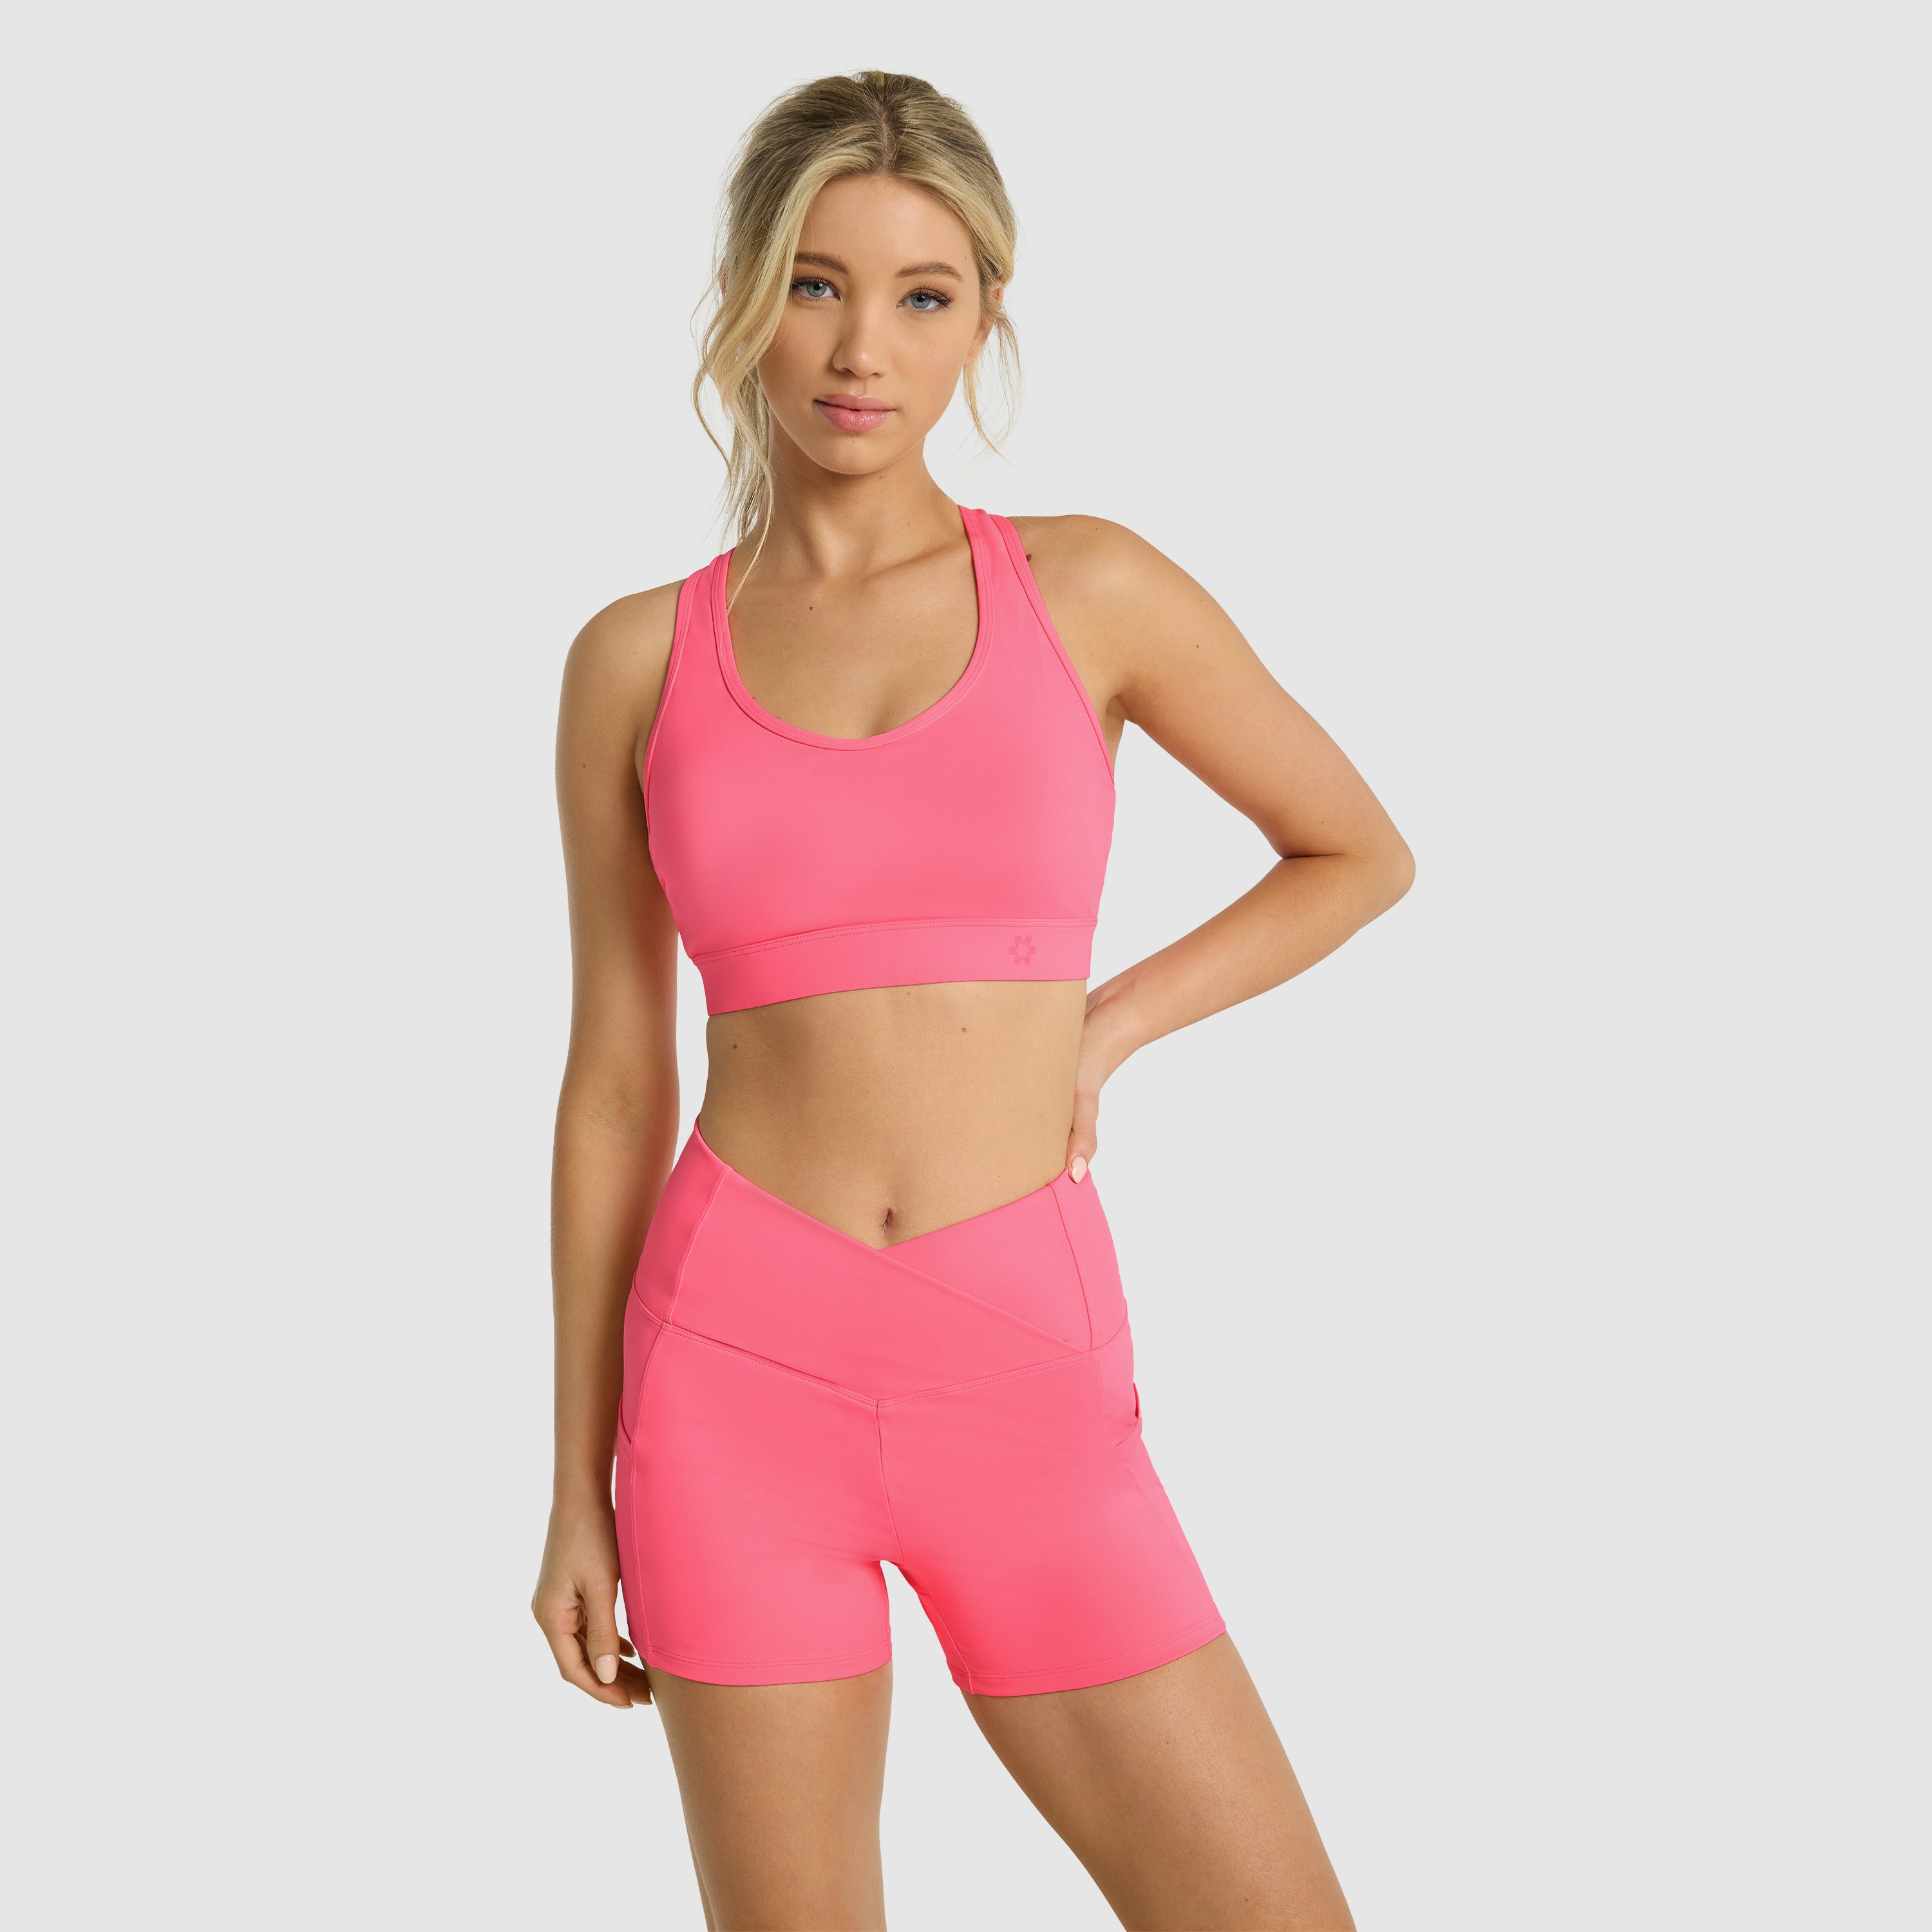 Party Pink Gym And Swim Adjustable High Impact Sports Bra, Women's Tops